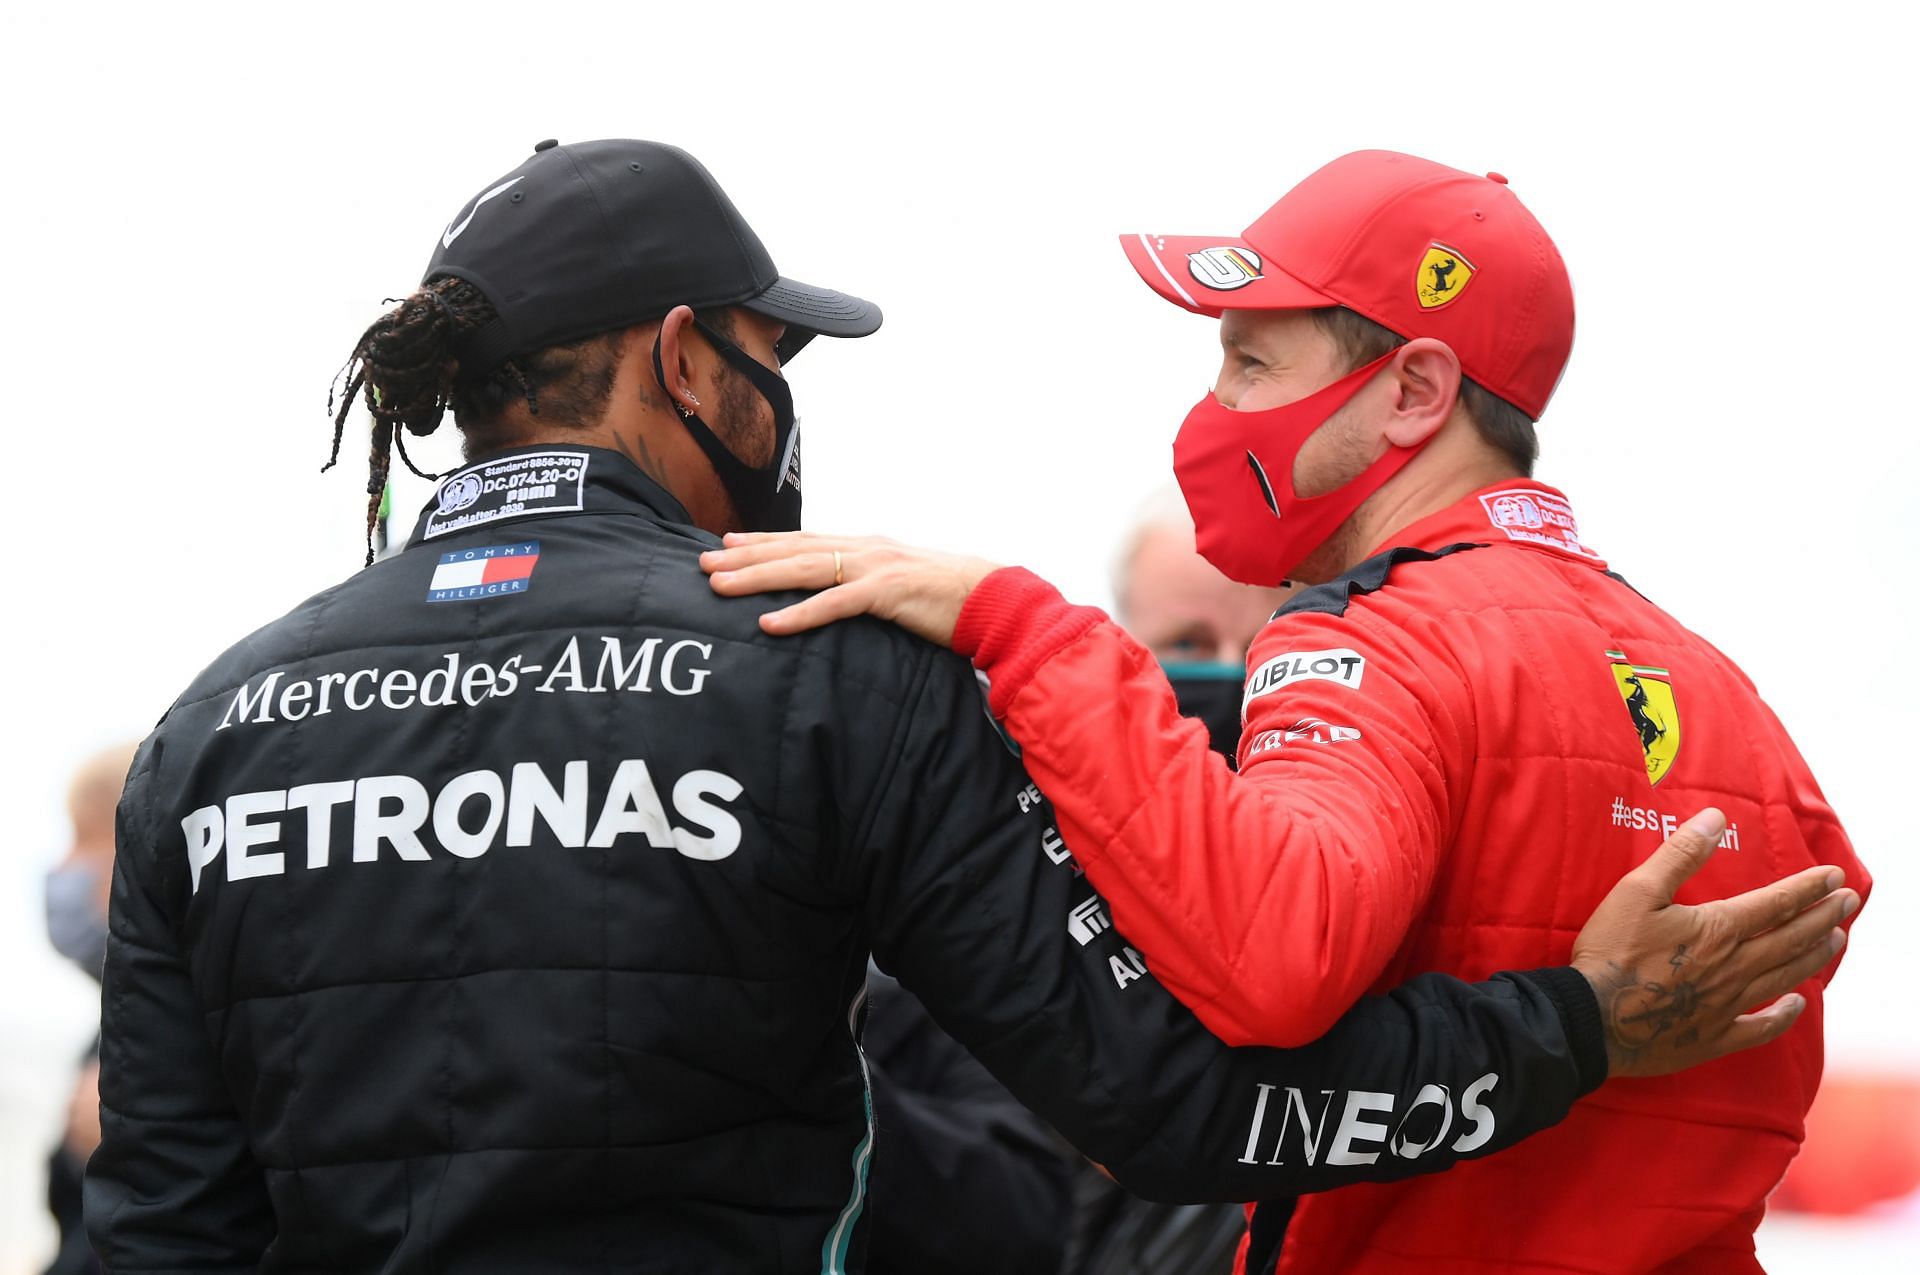 Lewis Hamilton (left) and Sebastian Vettel (right) in parc ferm&eacute; during the 2020 F1 Grand Prix of Turkey at Intercity Istanbul Park in Turkey, after the Briton claimed his seventh title (Photo by Clive Mason/Getty Images)